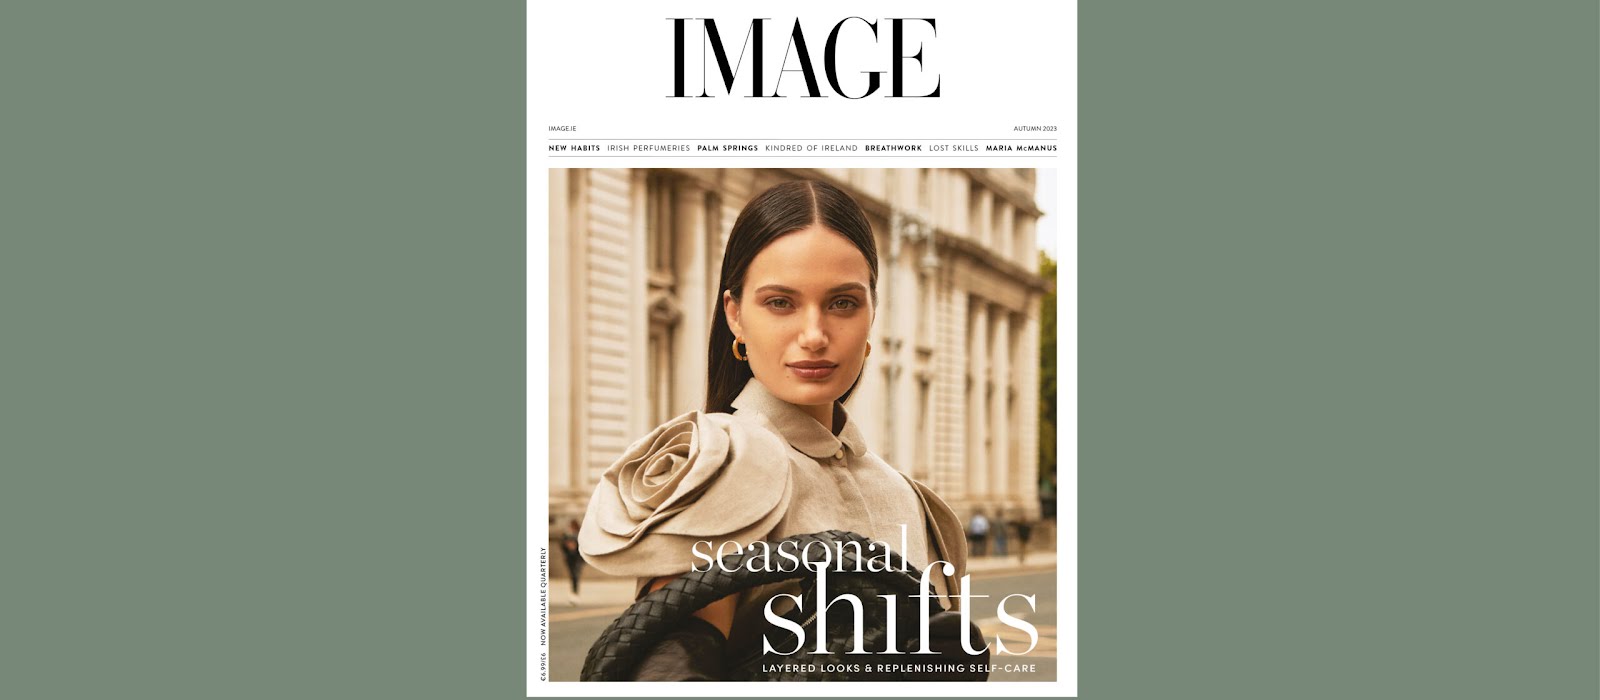 IMAGE Autumn is out now! Find out what’s inside…